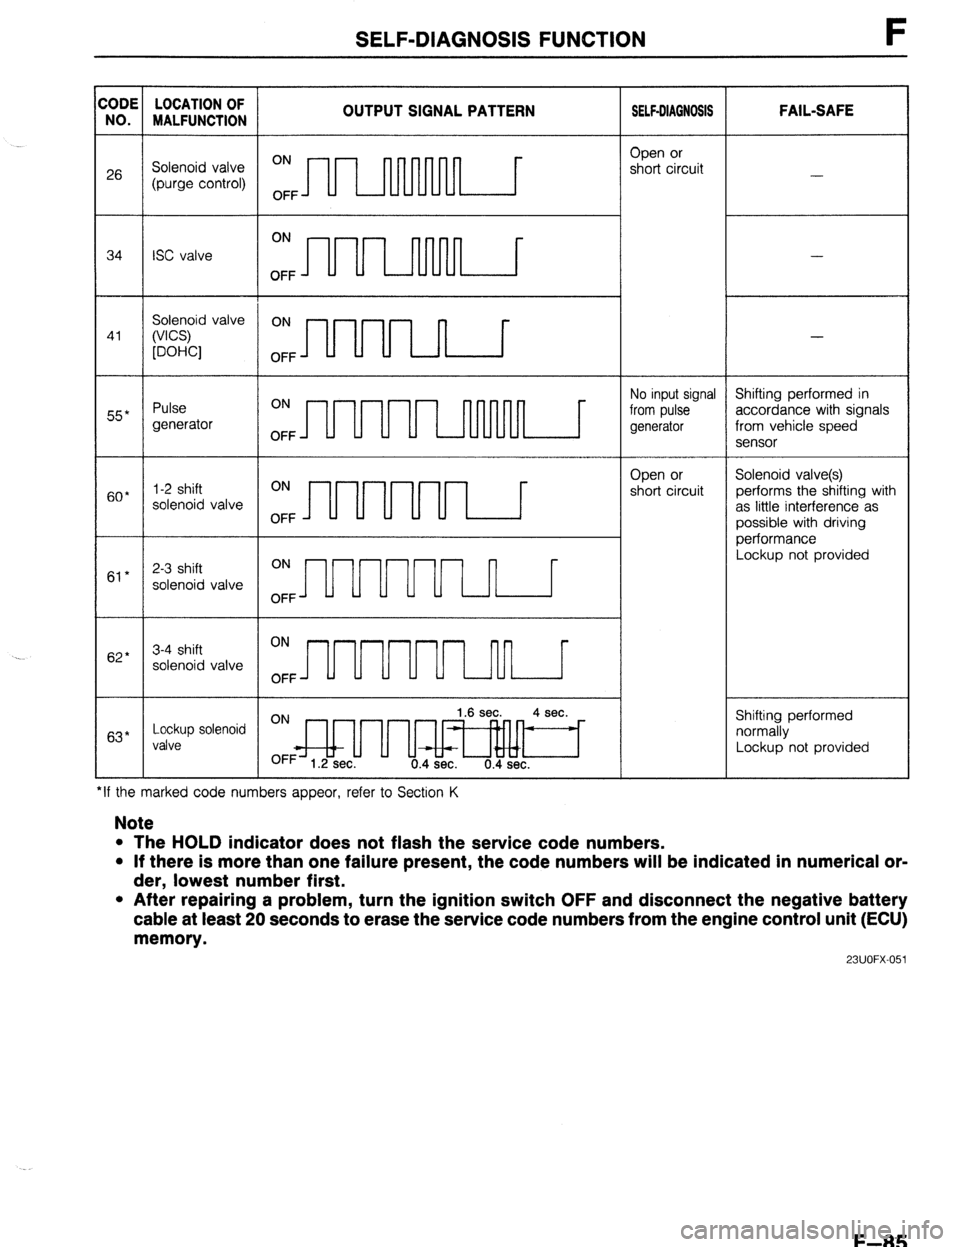 MAZDA 323 1989  Factory Repair Manual SELF-DIAGNOSIS FUNCTION F 
:ODE LOCATION OF 
NO. 
MALFUNCTION 
26 Solenoid valve ON 
(purge control) 
OFF OUTPUT SIGNAL PATTERN nnnnnll 1 SELF4IAGNOSIS 
Open or 
short circuit FAIL-SAFE 
- 
ON 
34 
IS